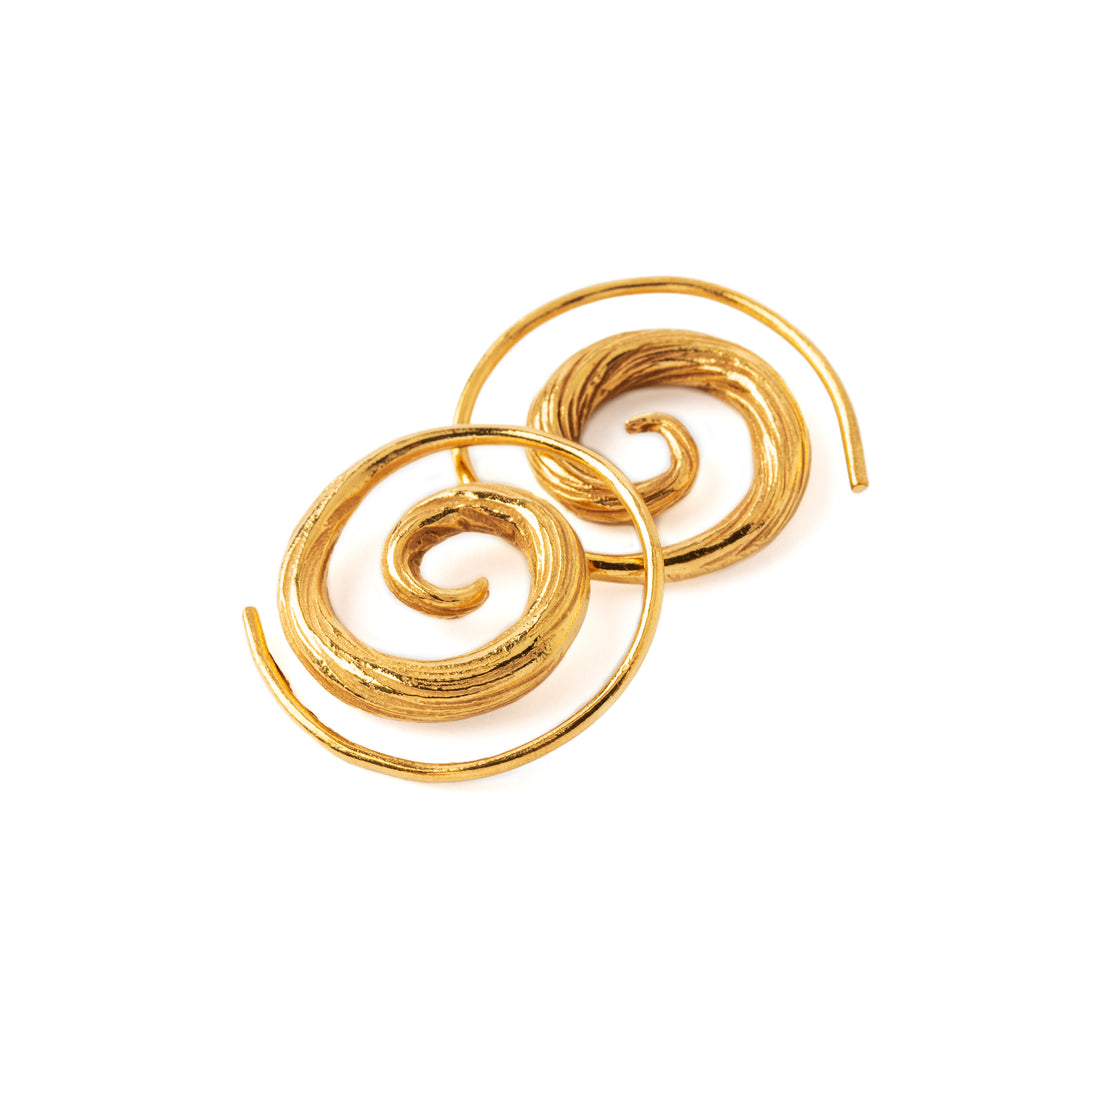 El Nino Gold Spiral Earrings front and side view